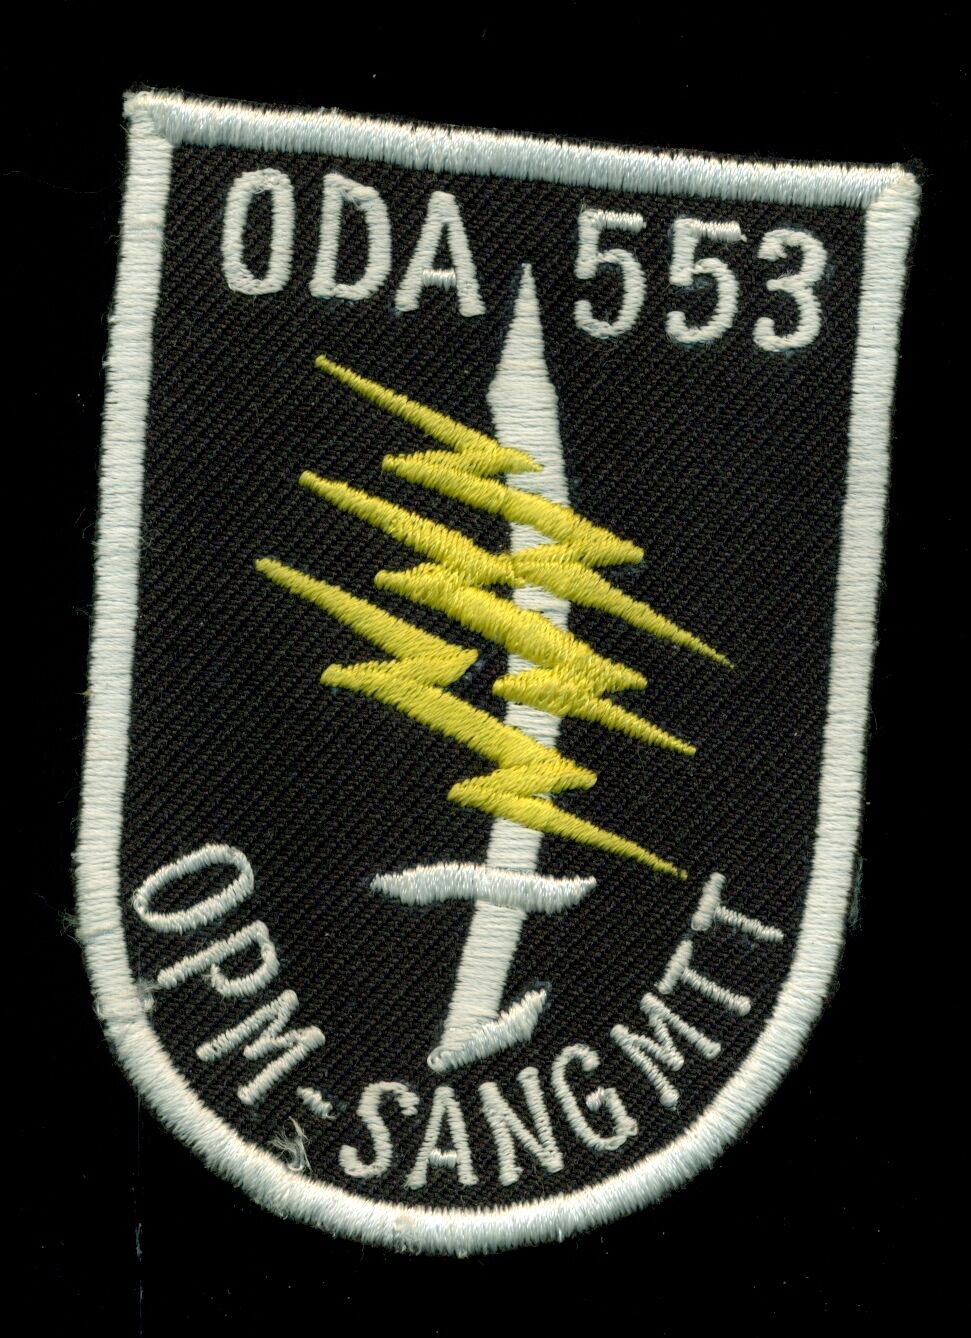 US Army Special Forces ODA 553 OPM-SANG MTT Patch S-24